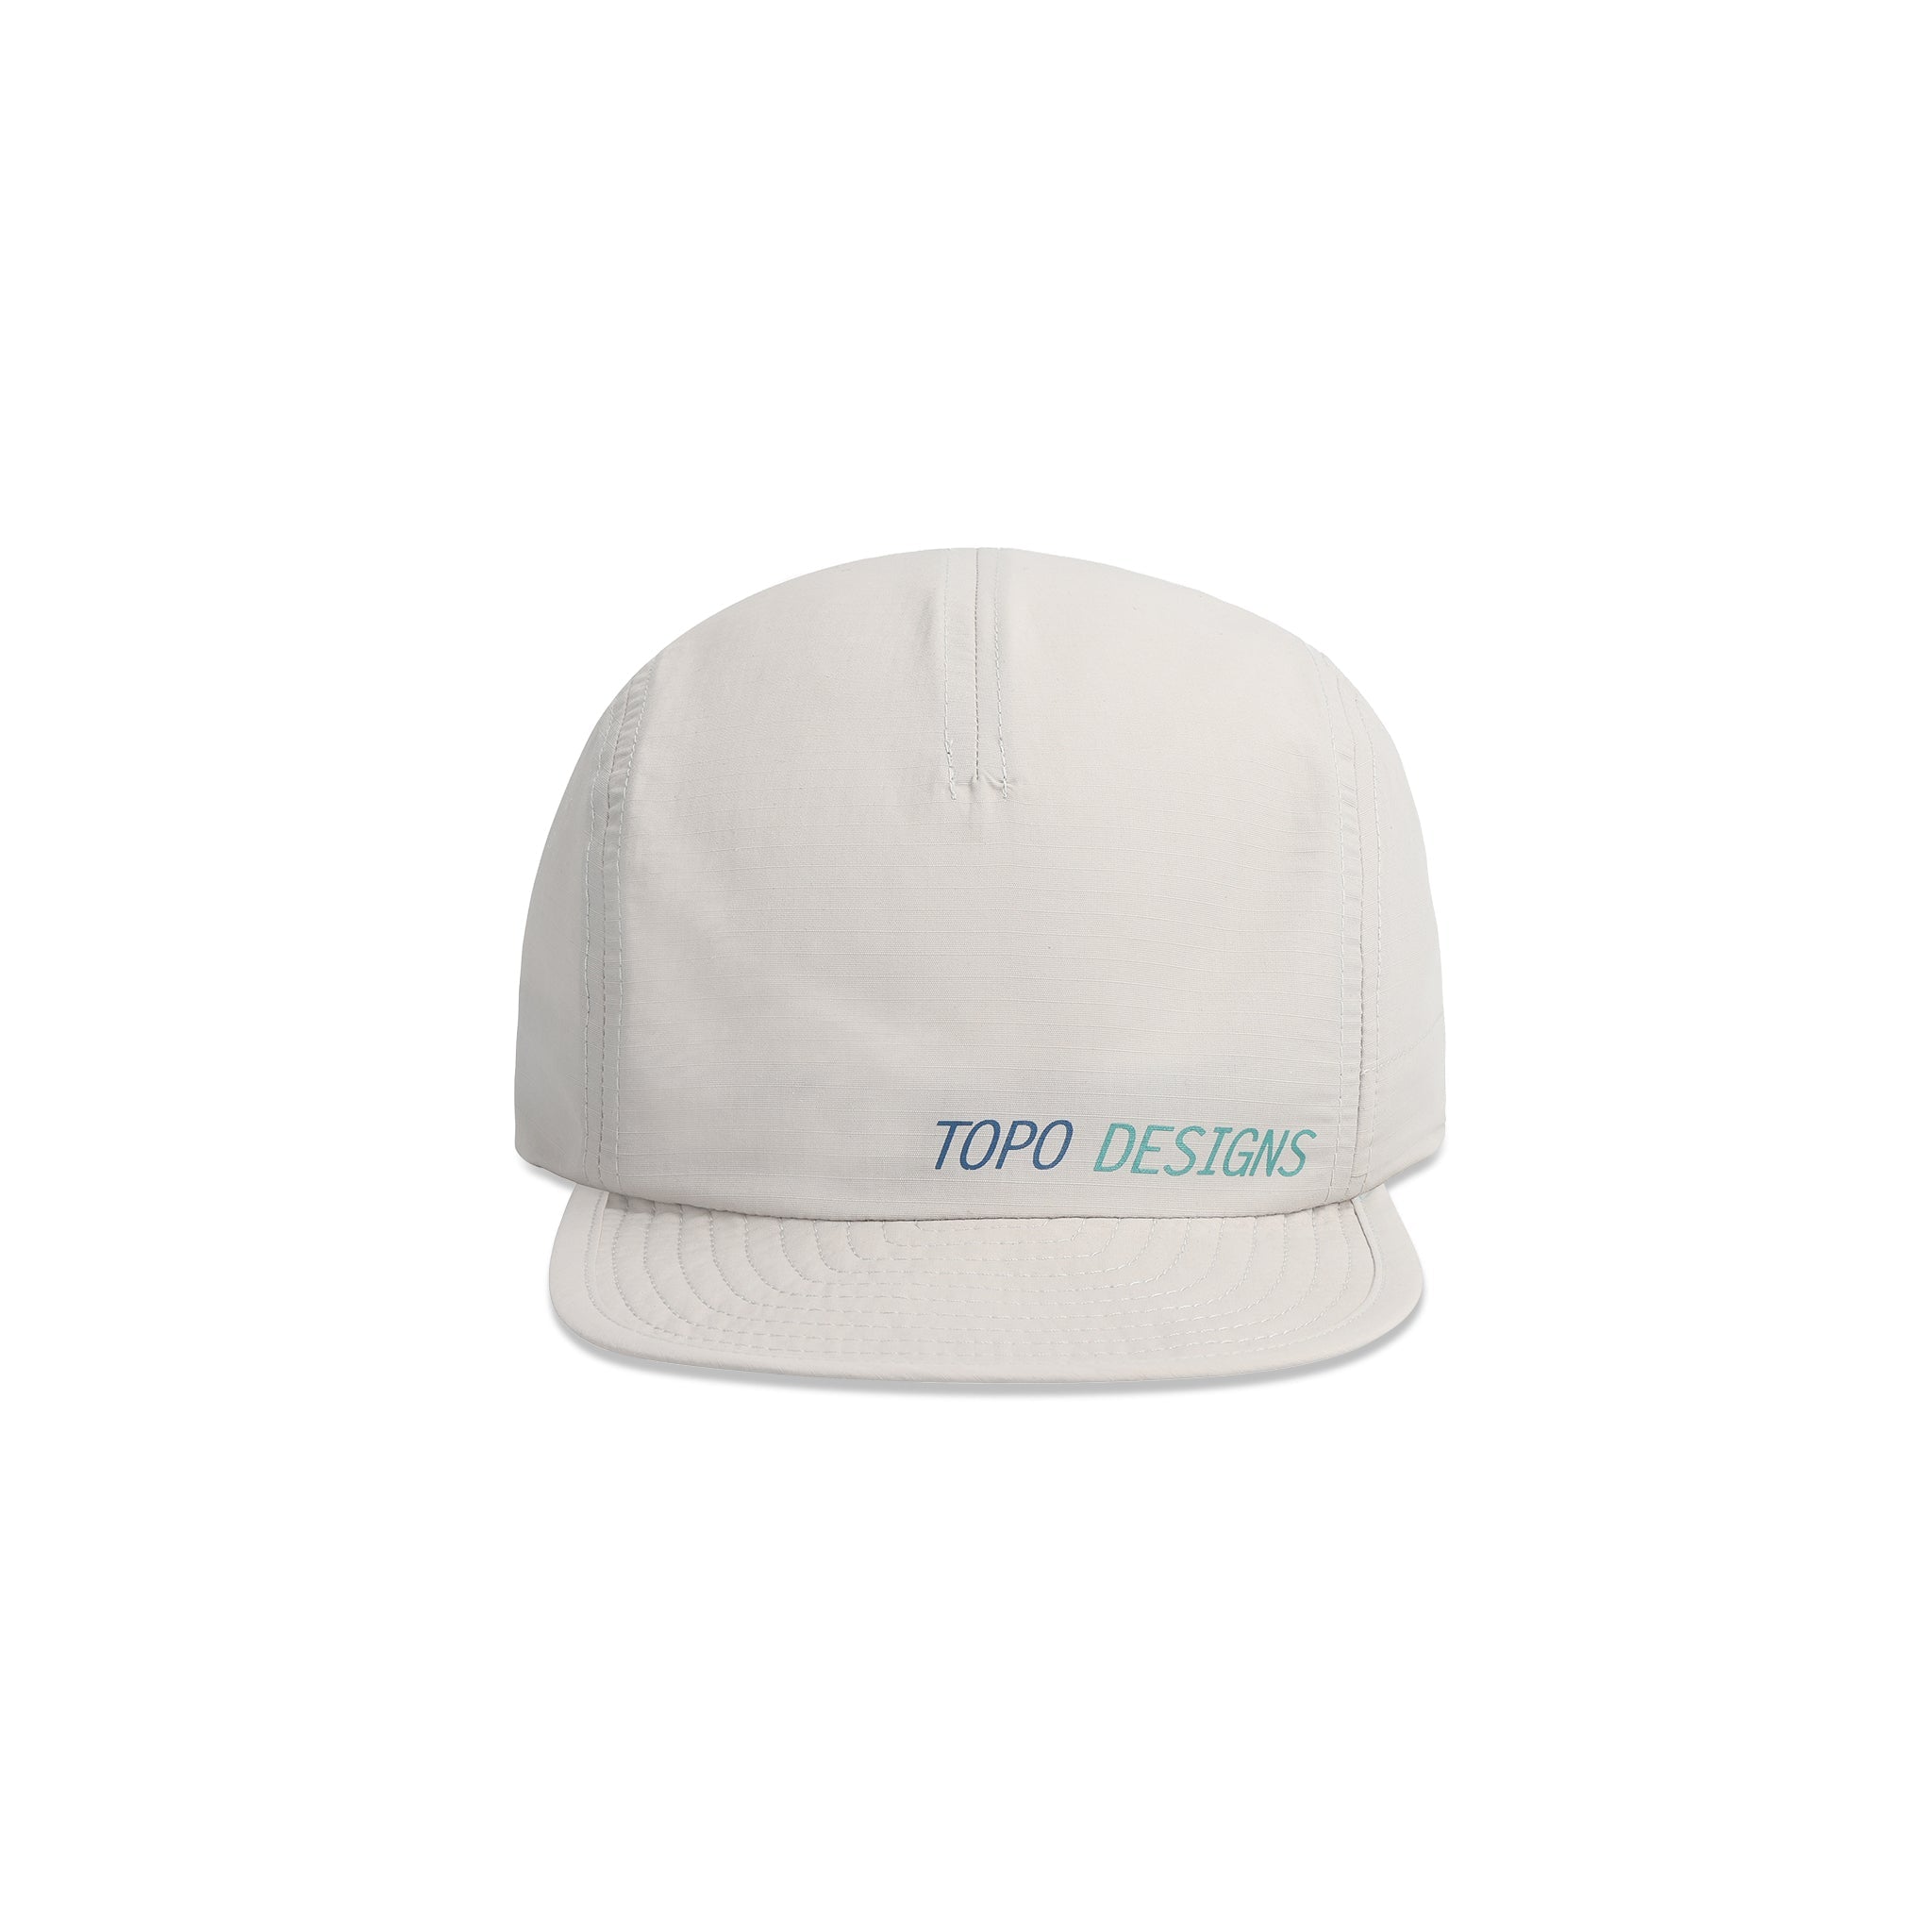 Front View of Topo Designs Global Packable Hat in "Light Gray"